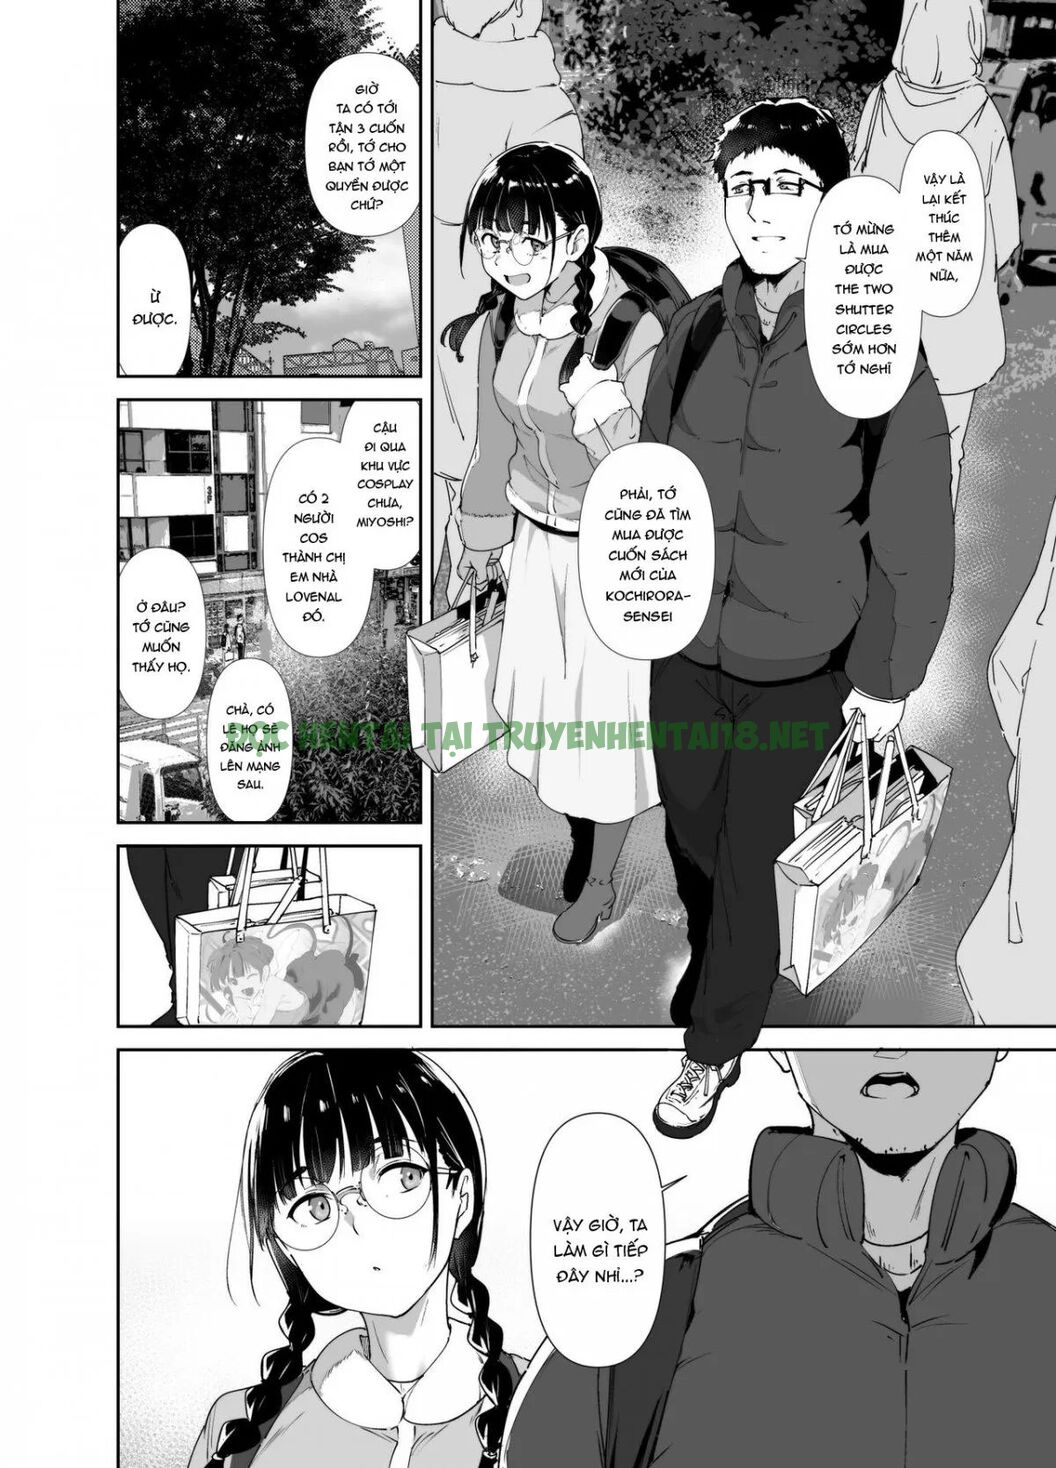 Xem ảnh Sex With Your Otaku Friend Is Mindblowing - Chapter 2 END - 5 - Hentai24h.Tv